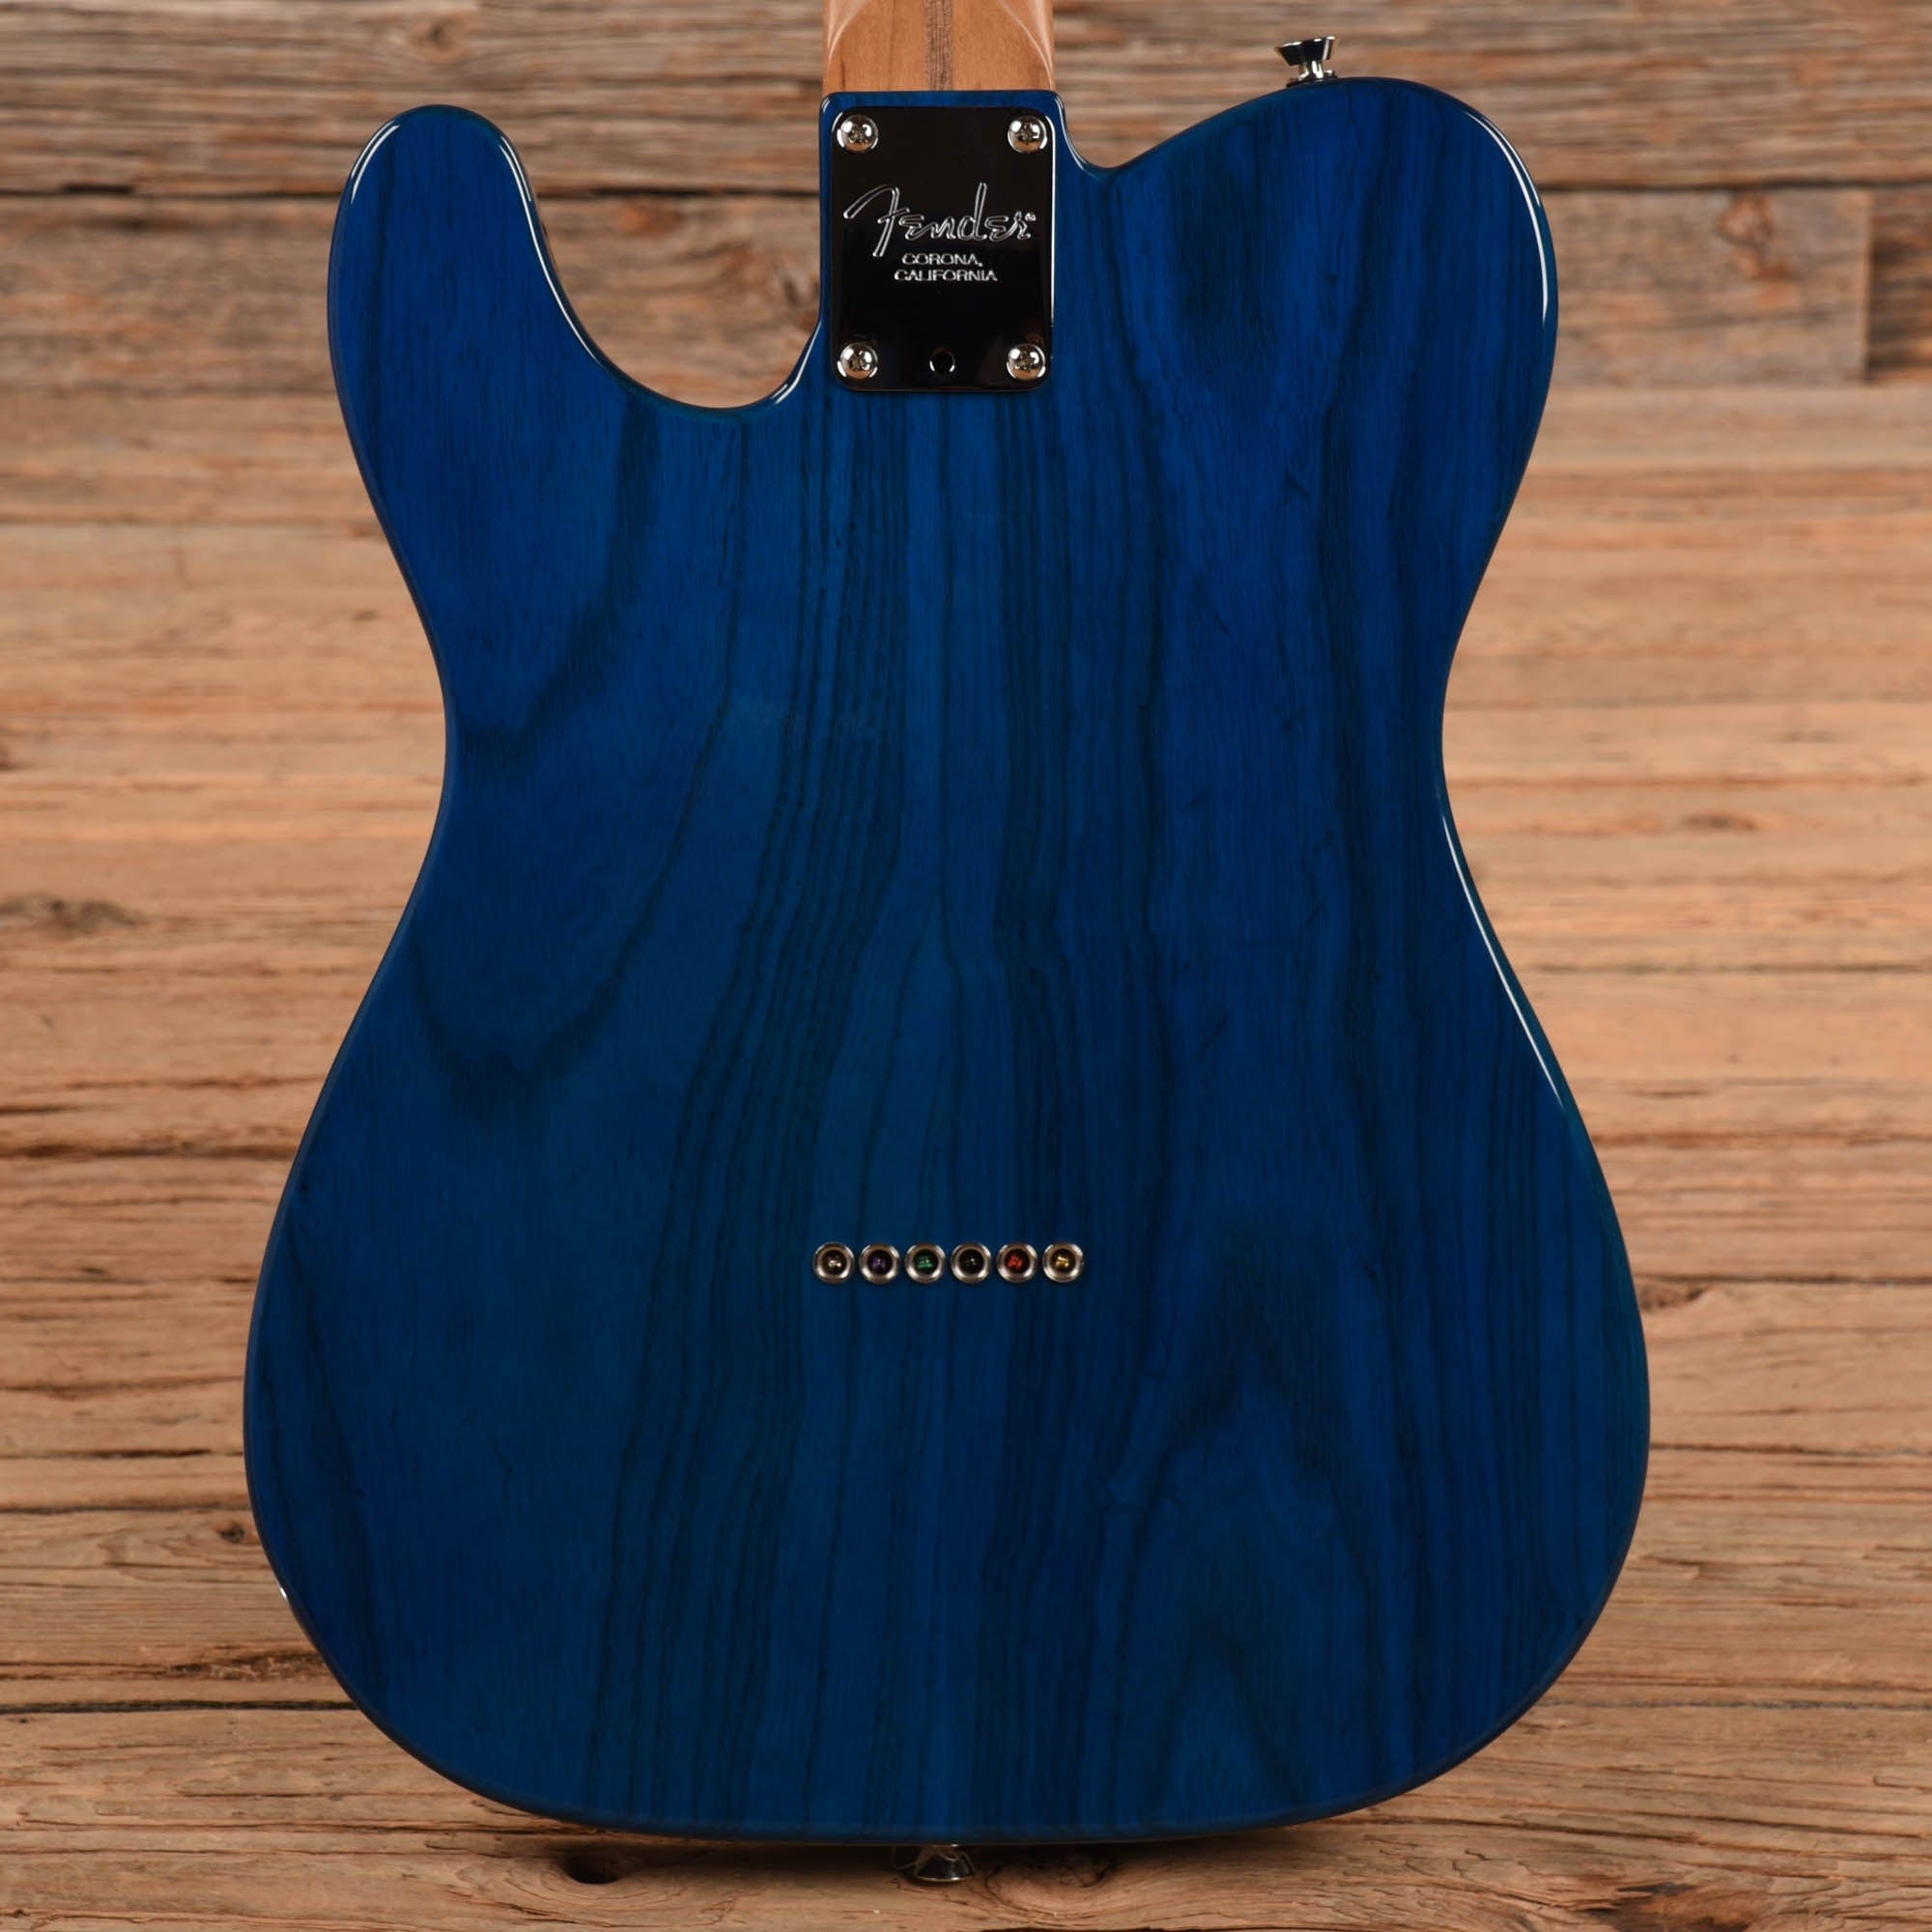 Fender American Professional Telecaster Blue 2019 Electric Guitars / Solid Body